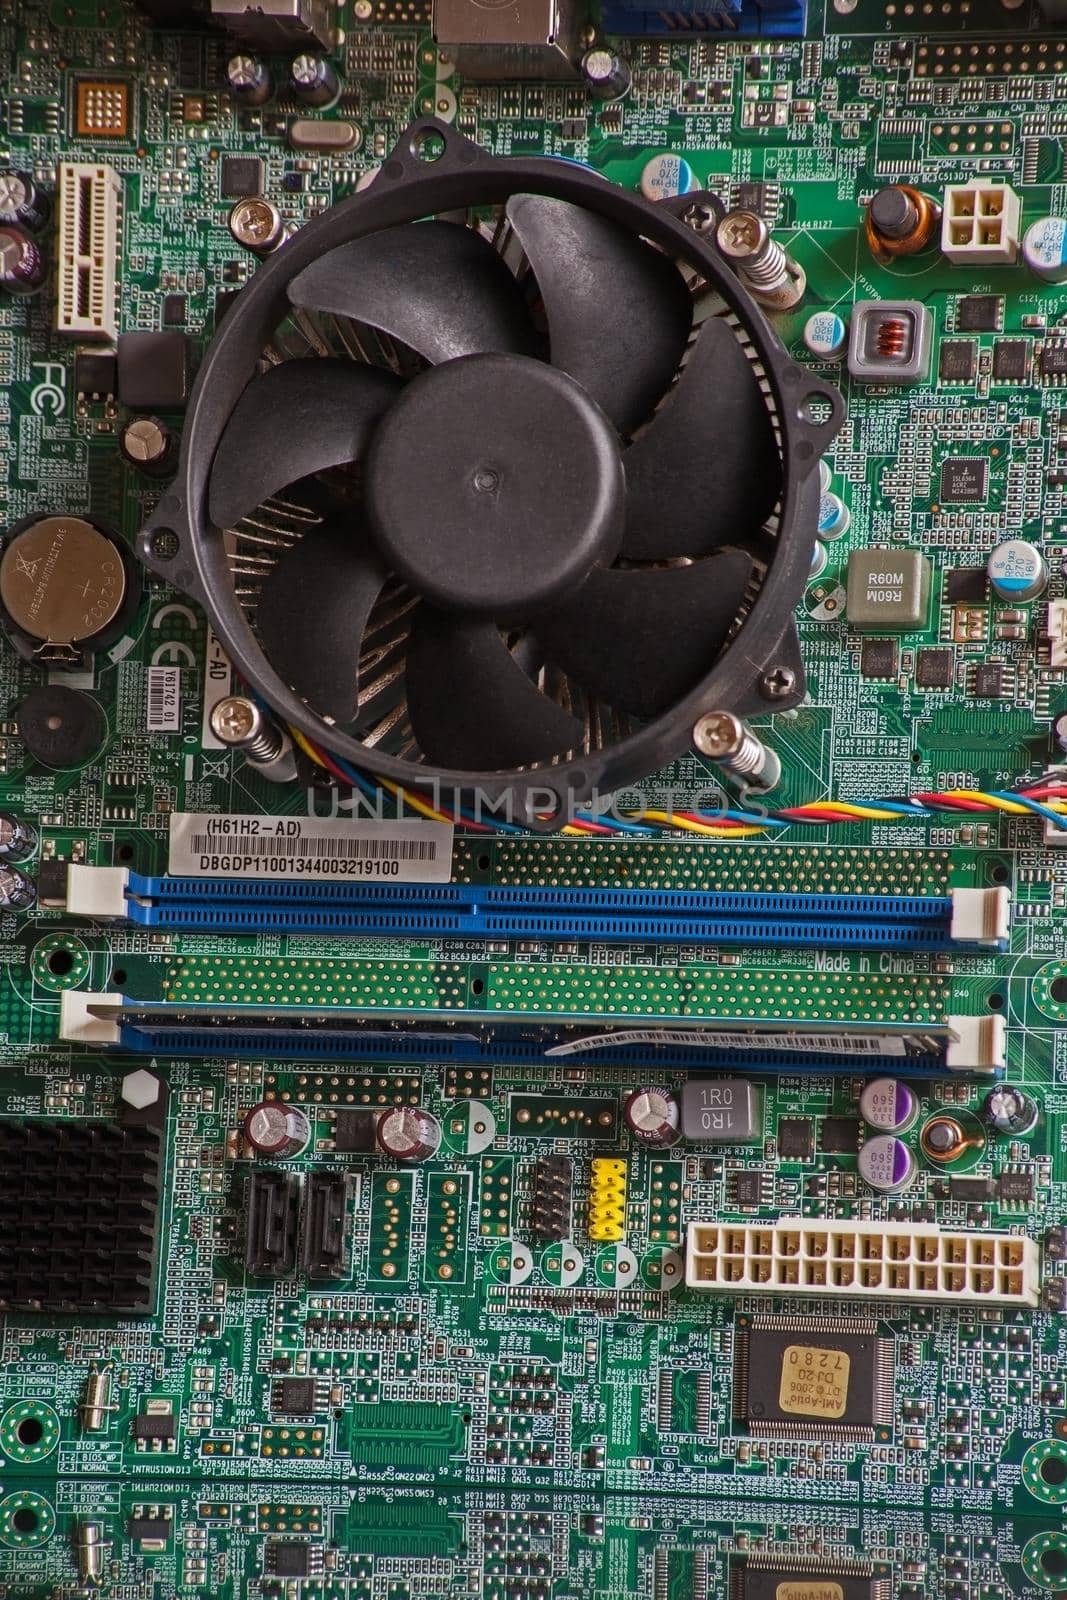 Airial view of a computer motherboard 13306 by kobus_peche